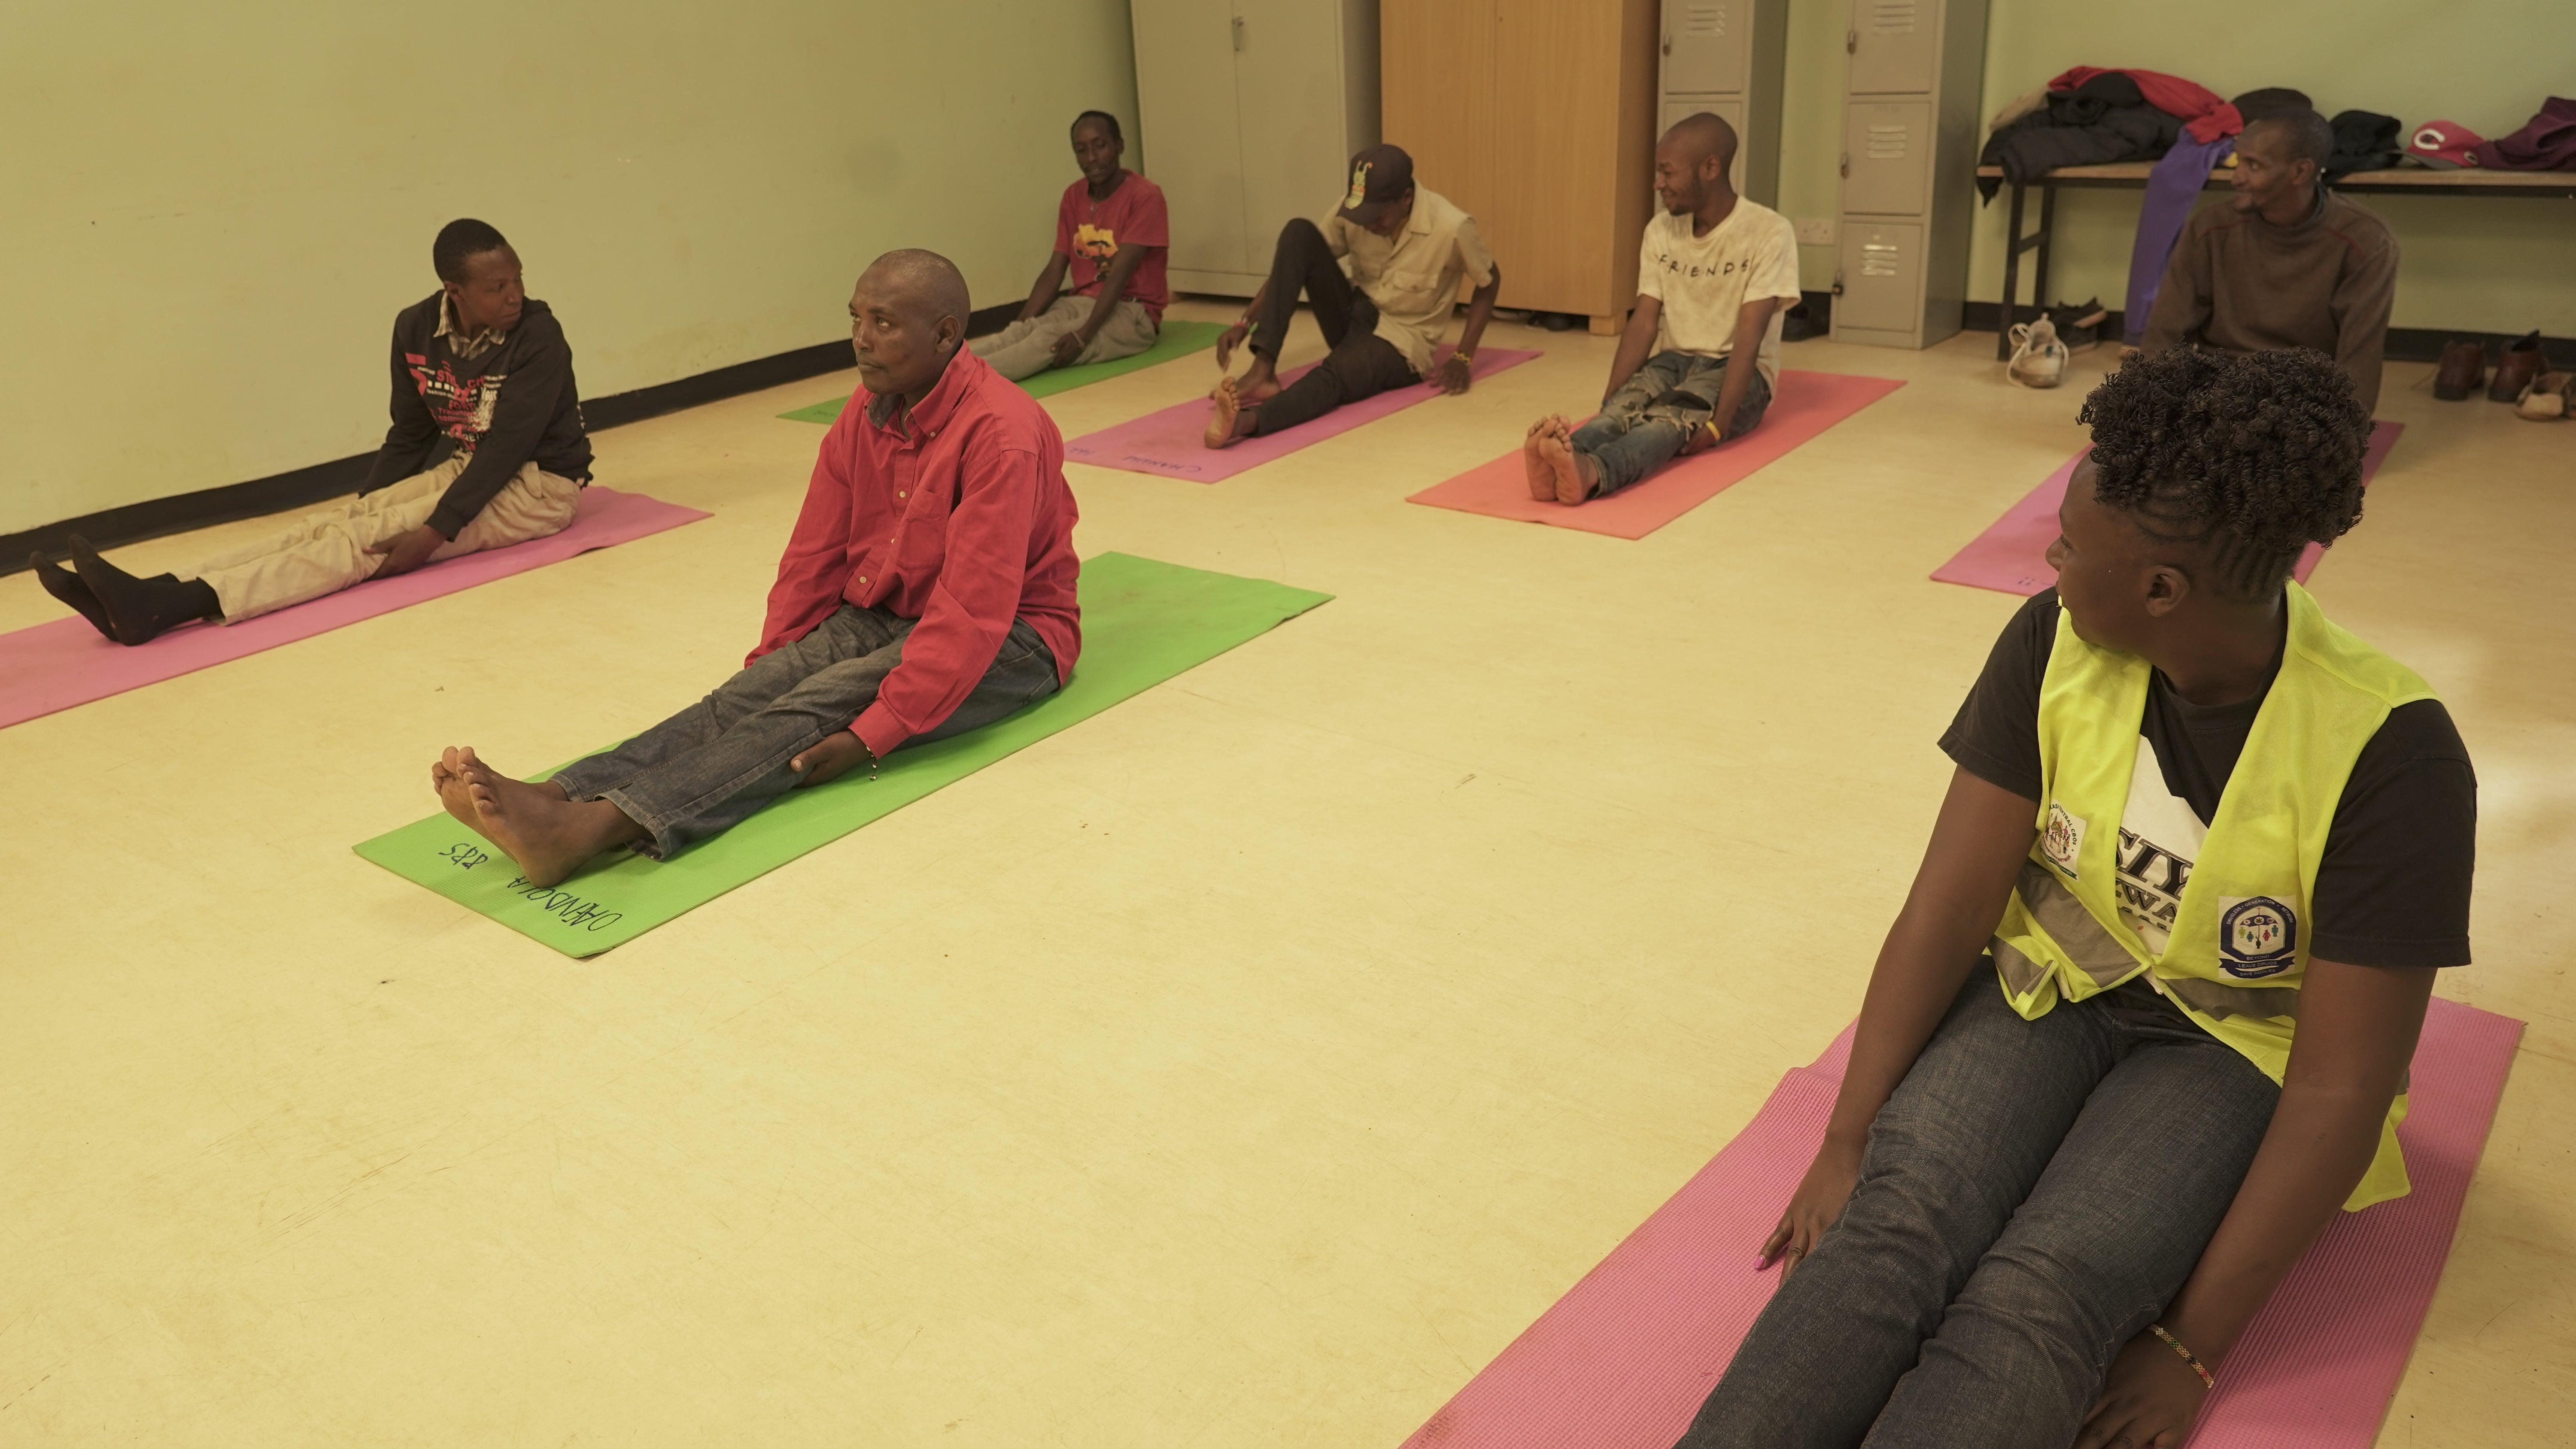 Treatment of People Who Use Drugs in Kenya: Patients during a Yoga Session in Karuri MAT clinic, Kiambu Kenya.